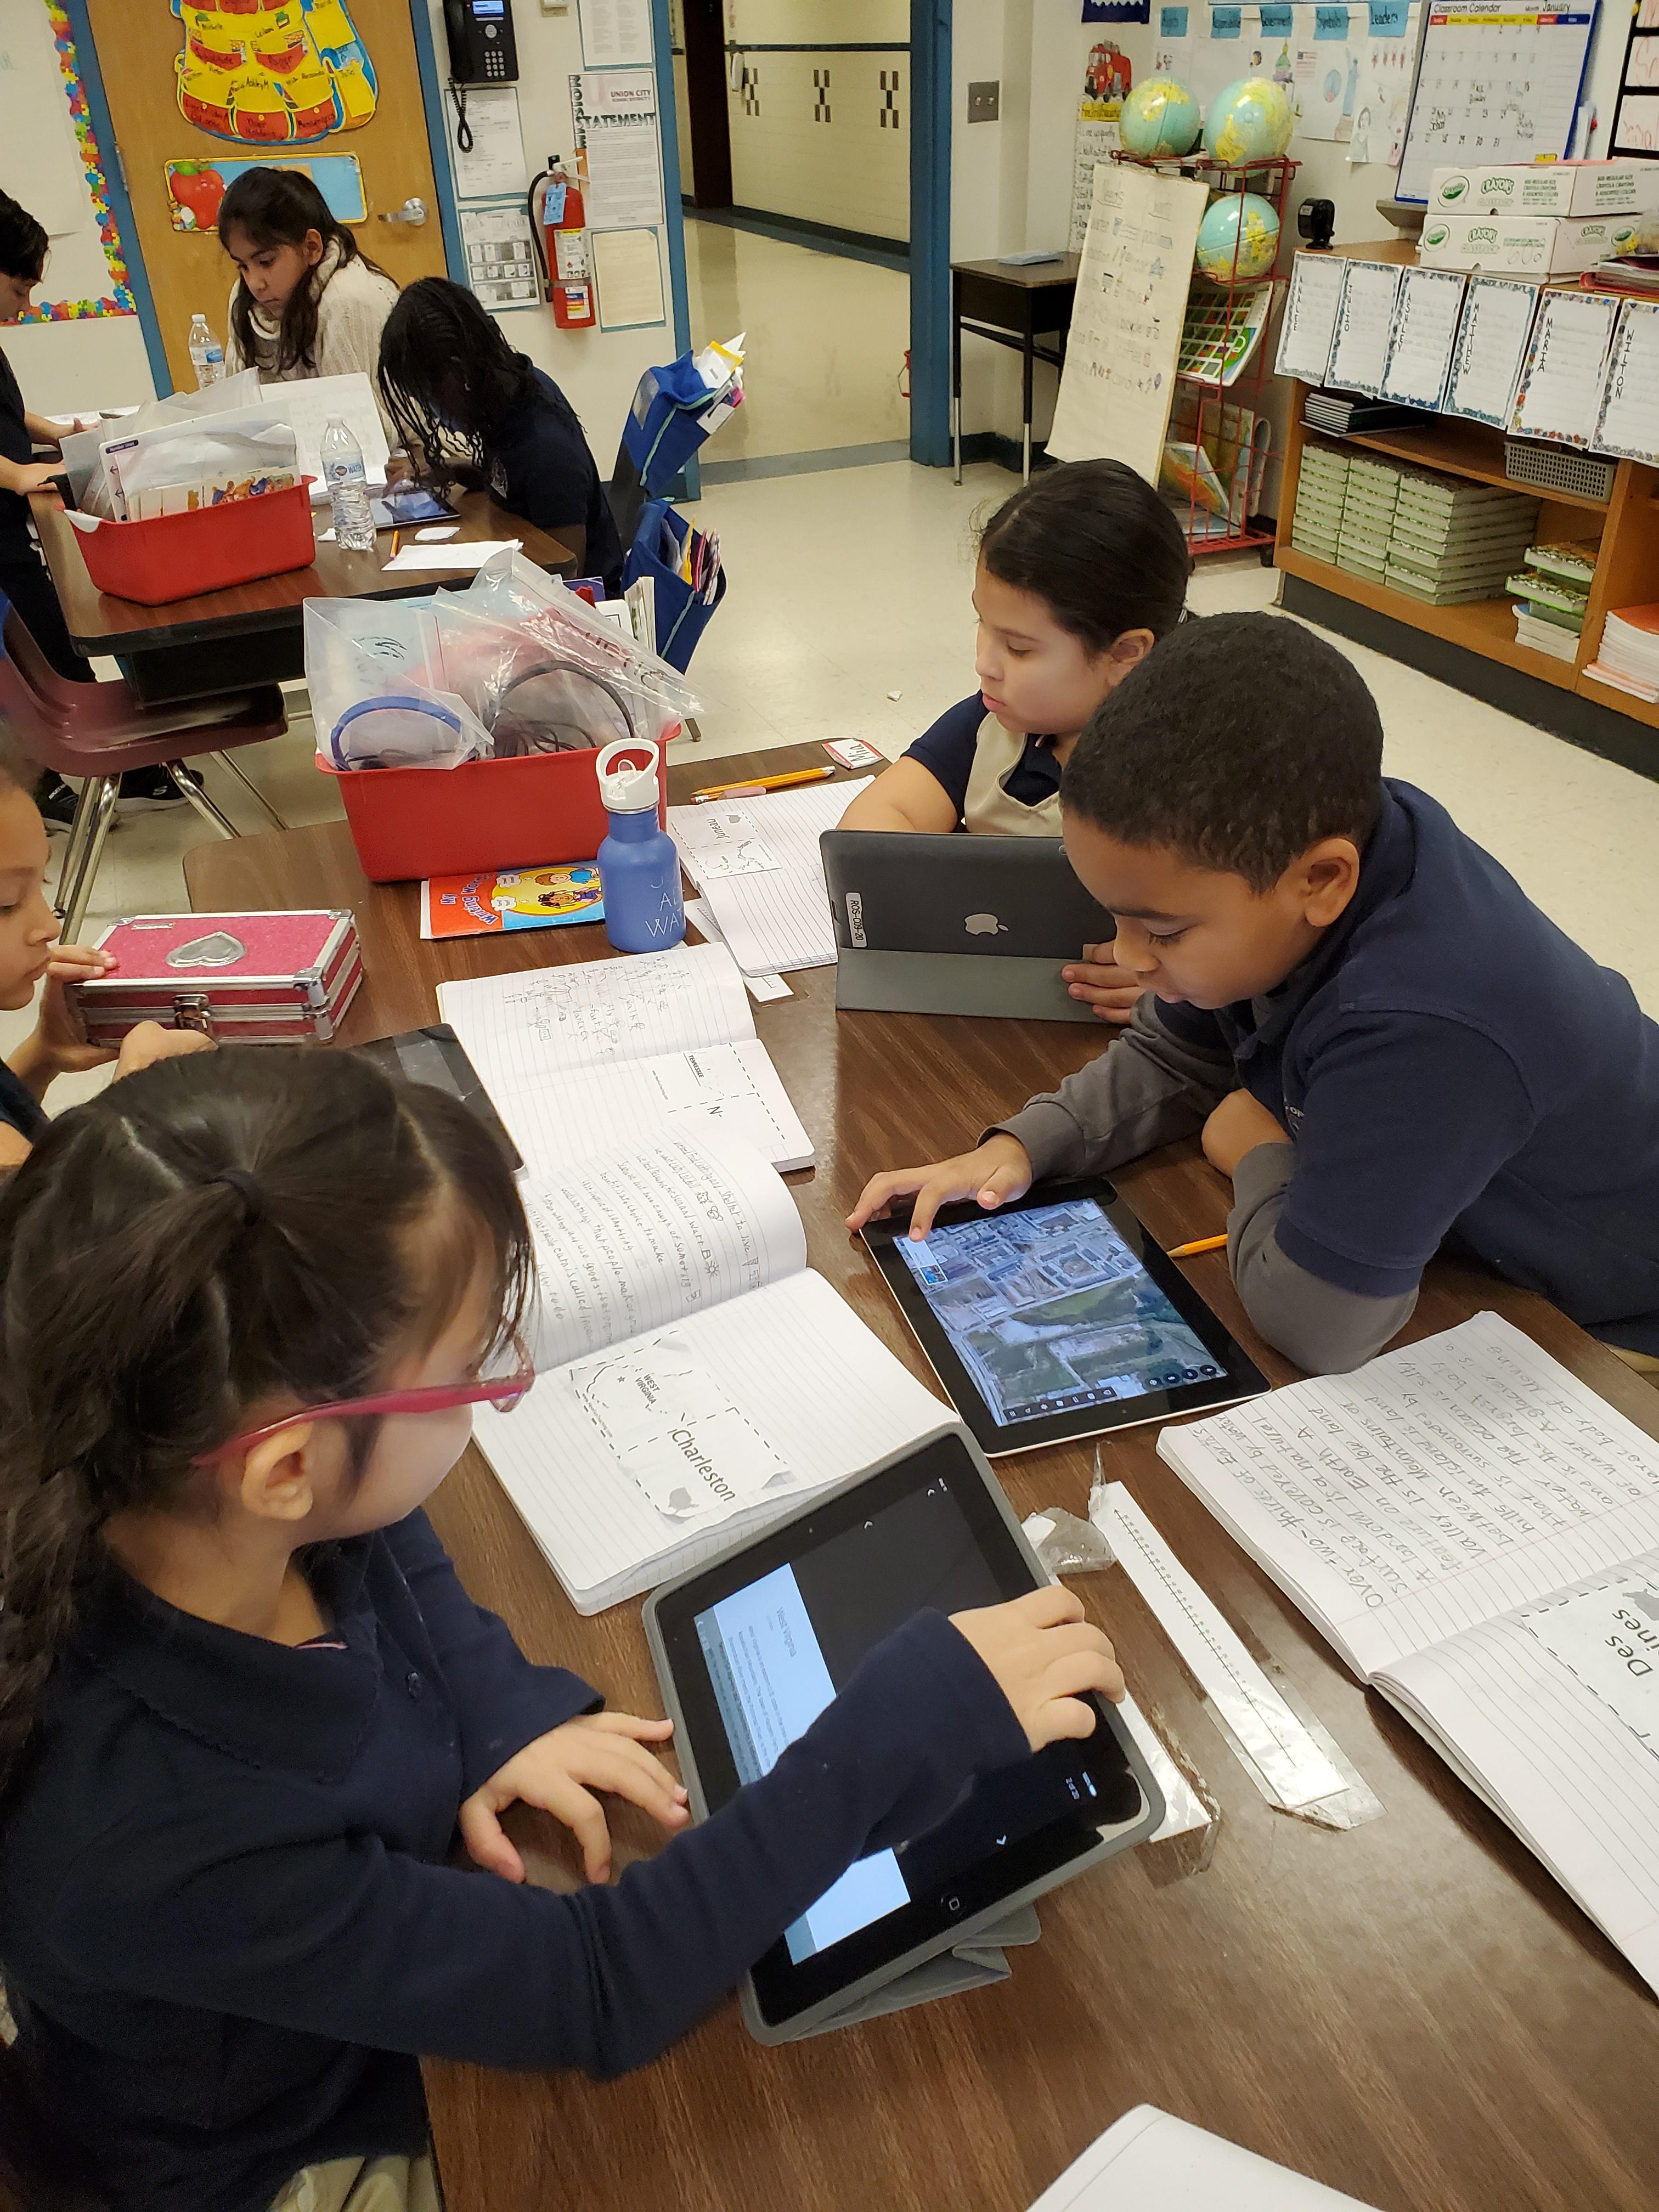 several children seated at desks with designated cities and using ipads to look the up